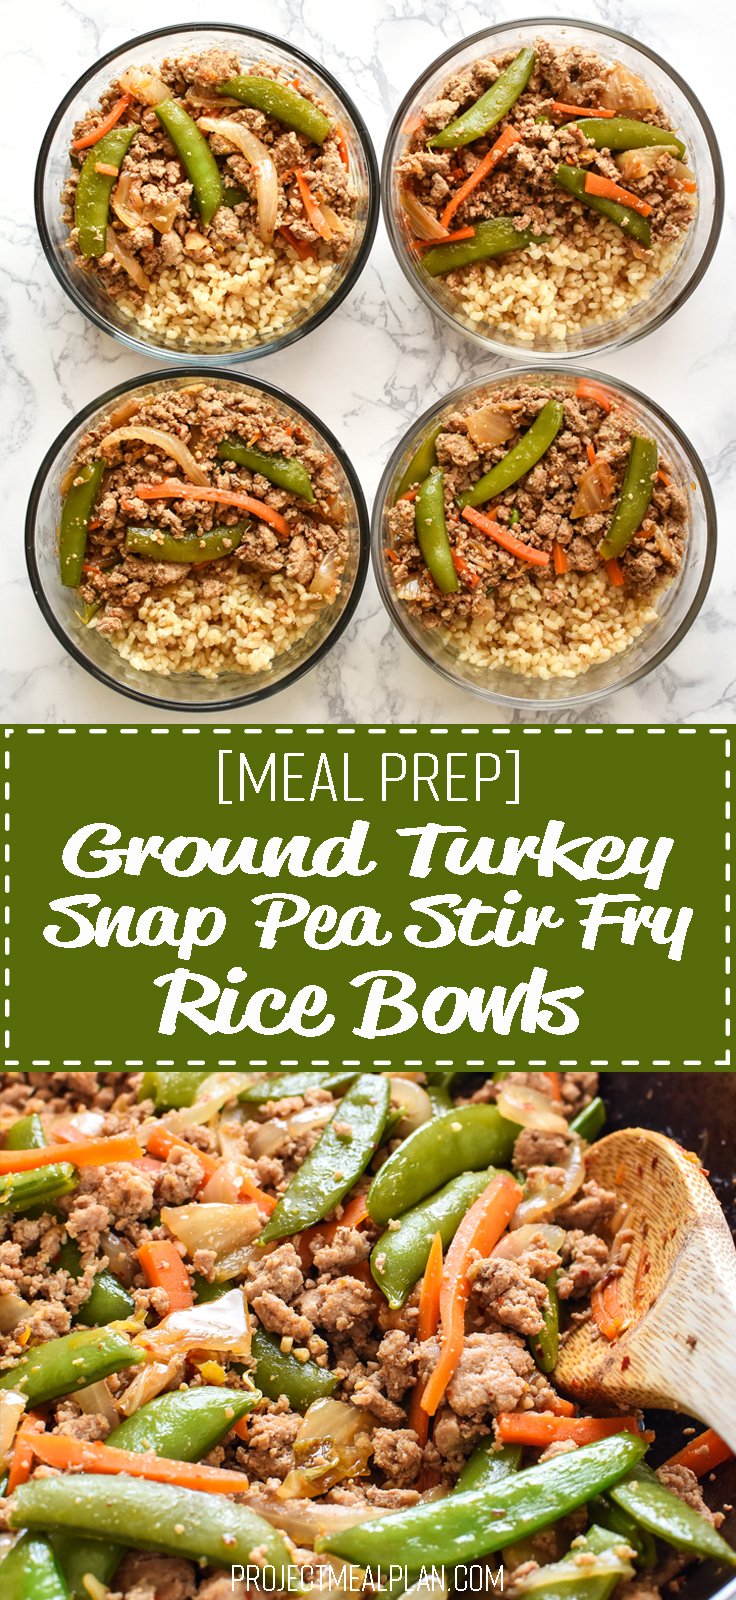 Meal Prep Ground Turkey Snap Pea Stir Fry Rice Bowls - A delicious recipe for veggie filled stir fry, super easy to meal prep for lunch! - ProjectMealPlan.com